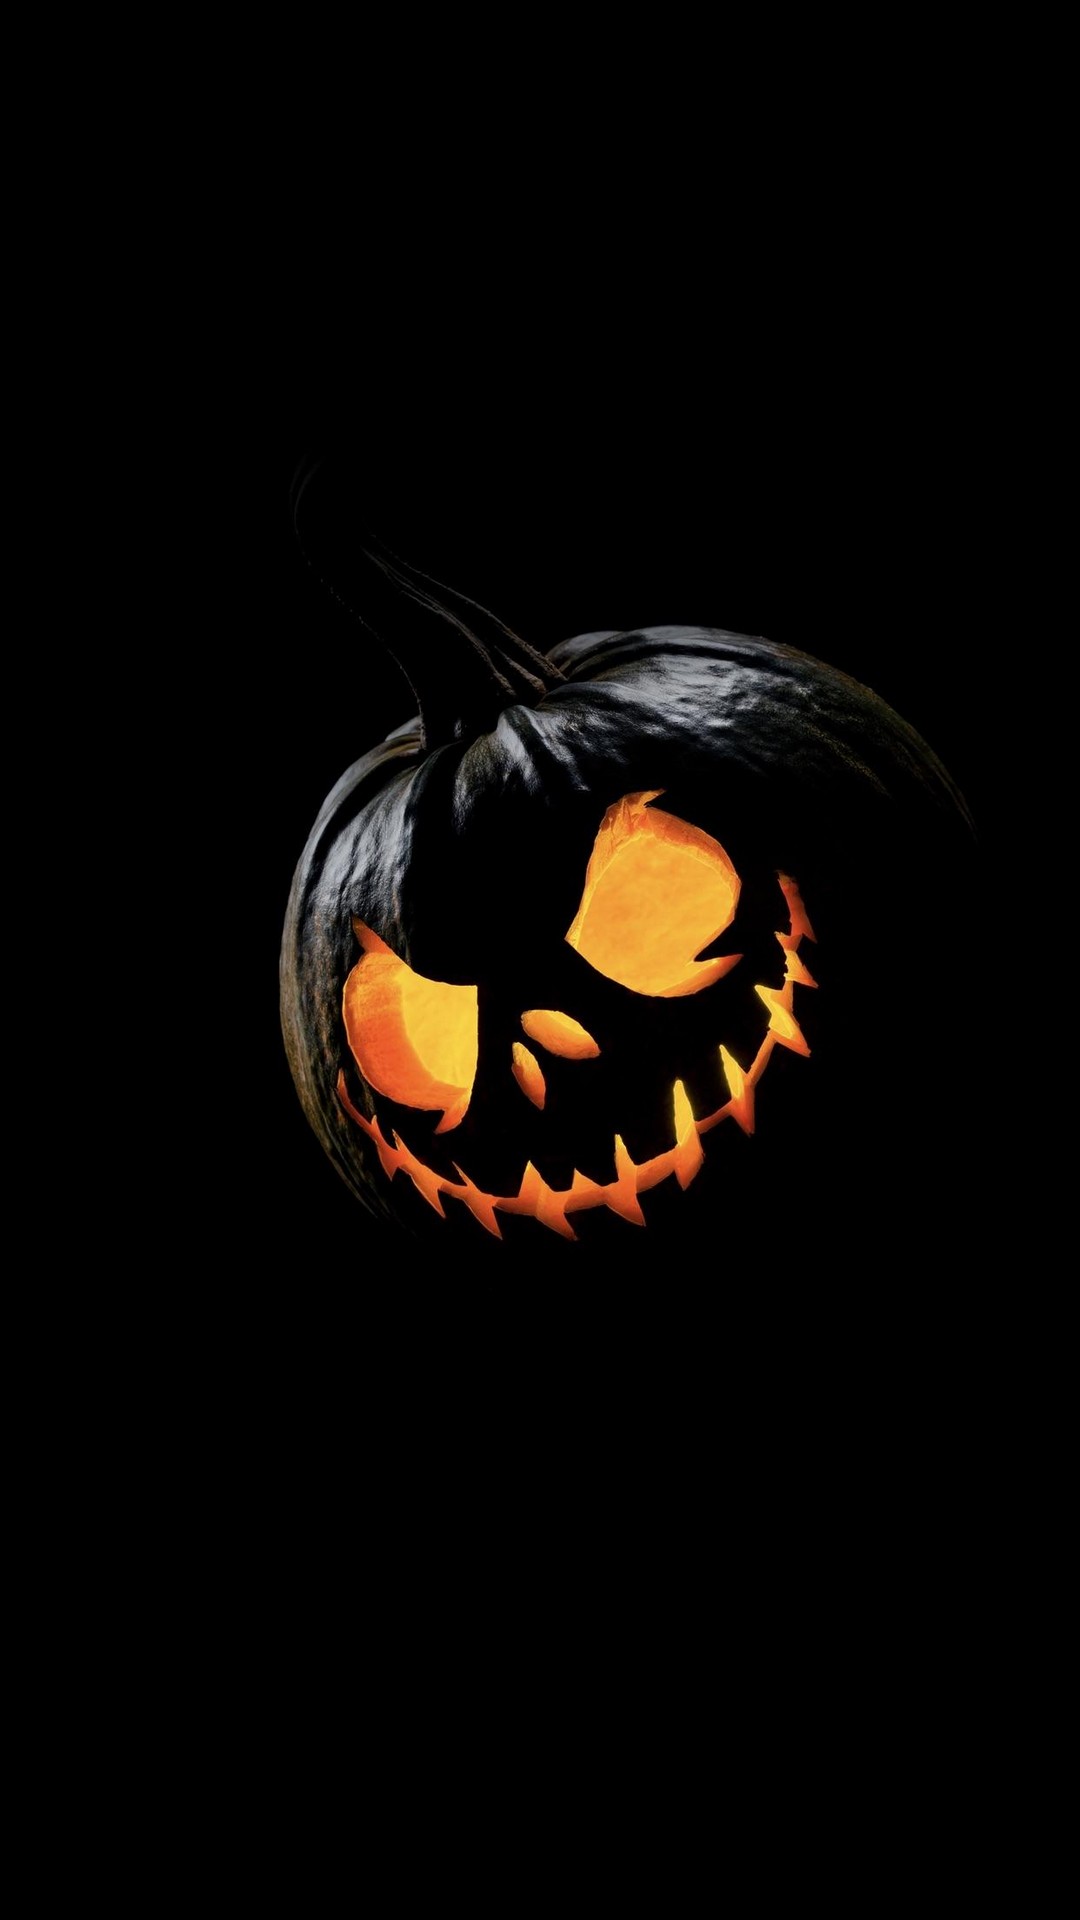 Halloween Phone Wallpaper with high-resolution 1080x1920 pixel. Download all Mobile Wallpapers and Use them as wallpapers for your iPhone, Tablet, iPad, Android and other mobile devices